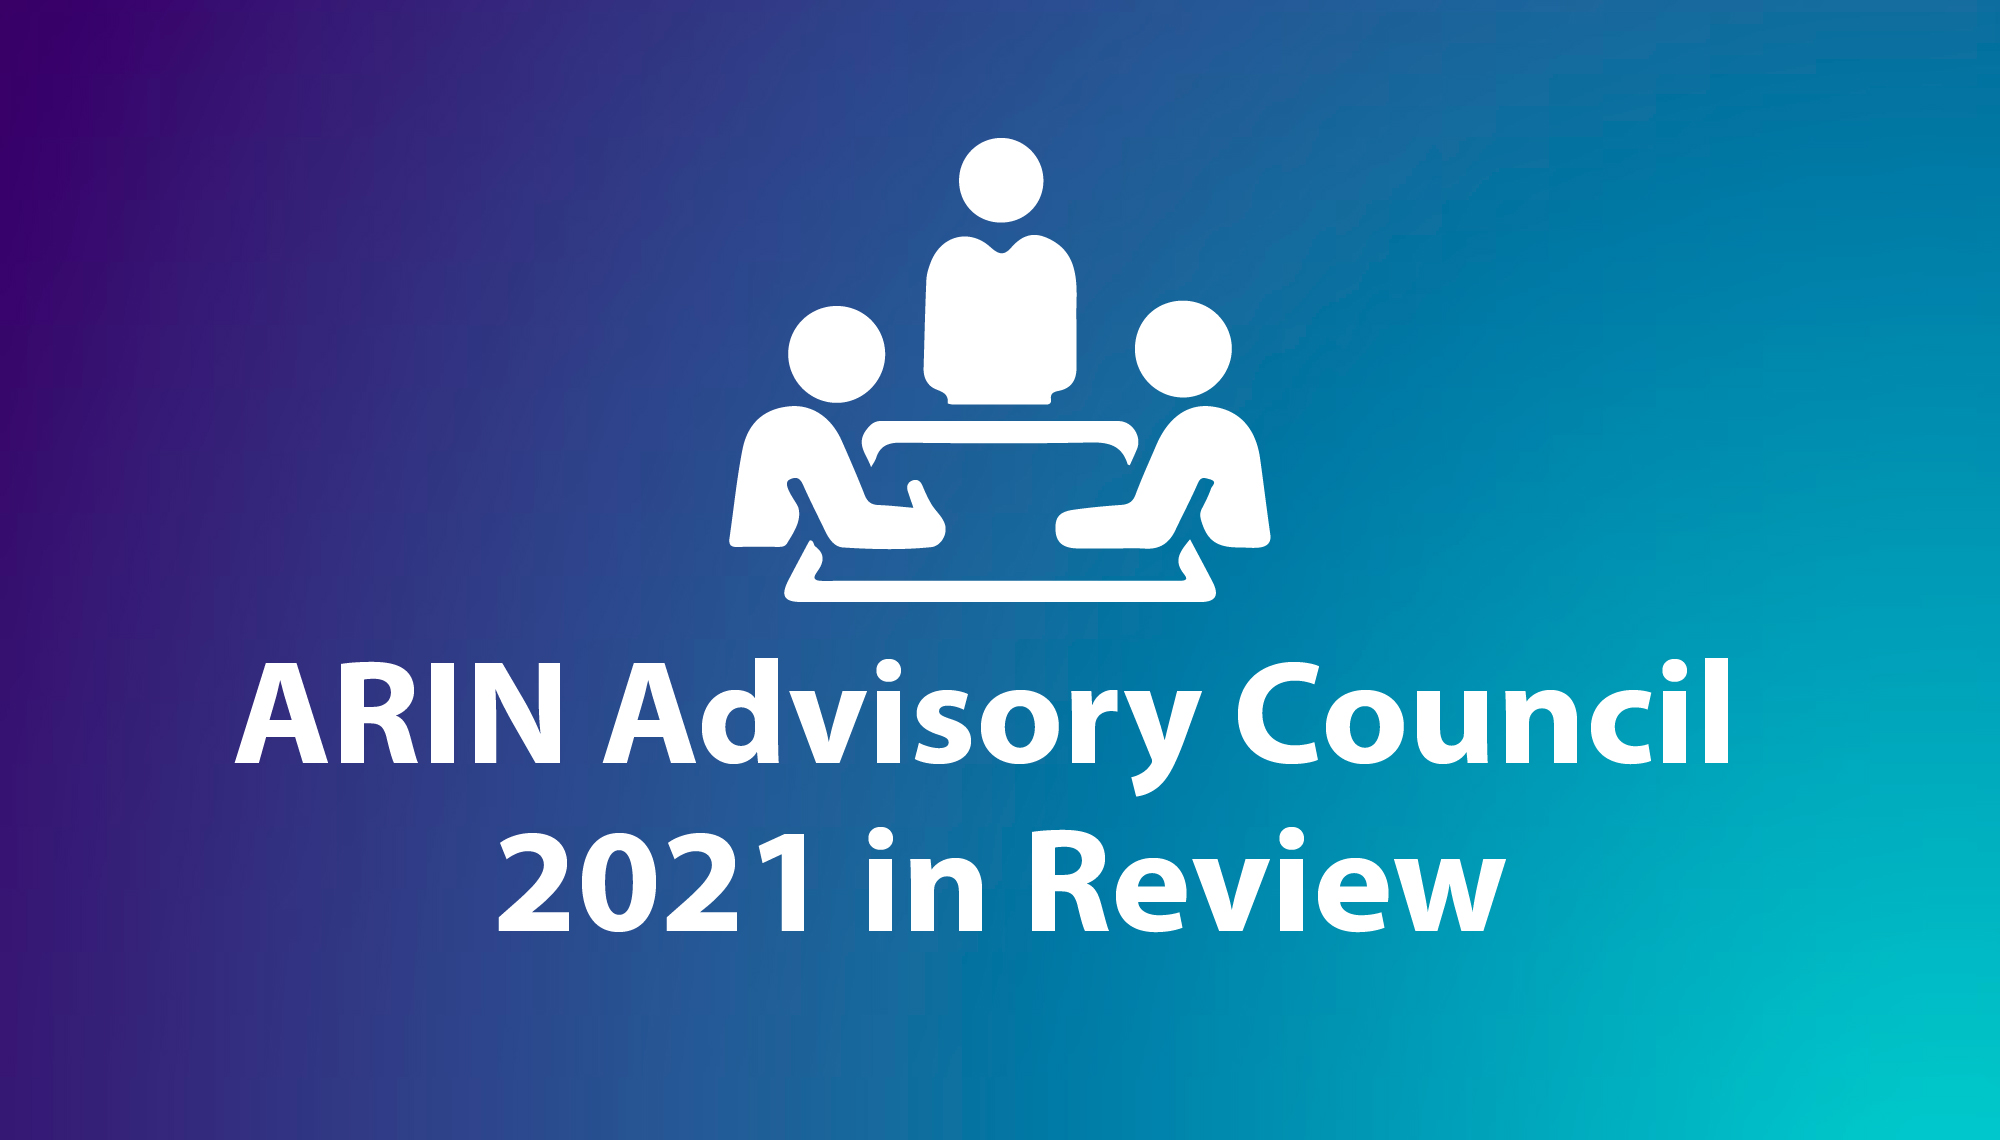 ARIN Advisory Council - 2021 in Review